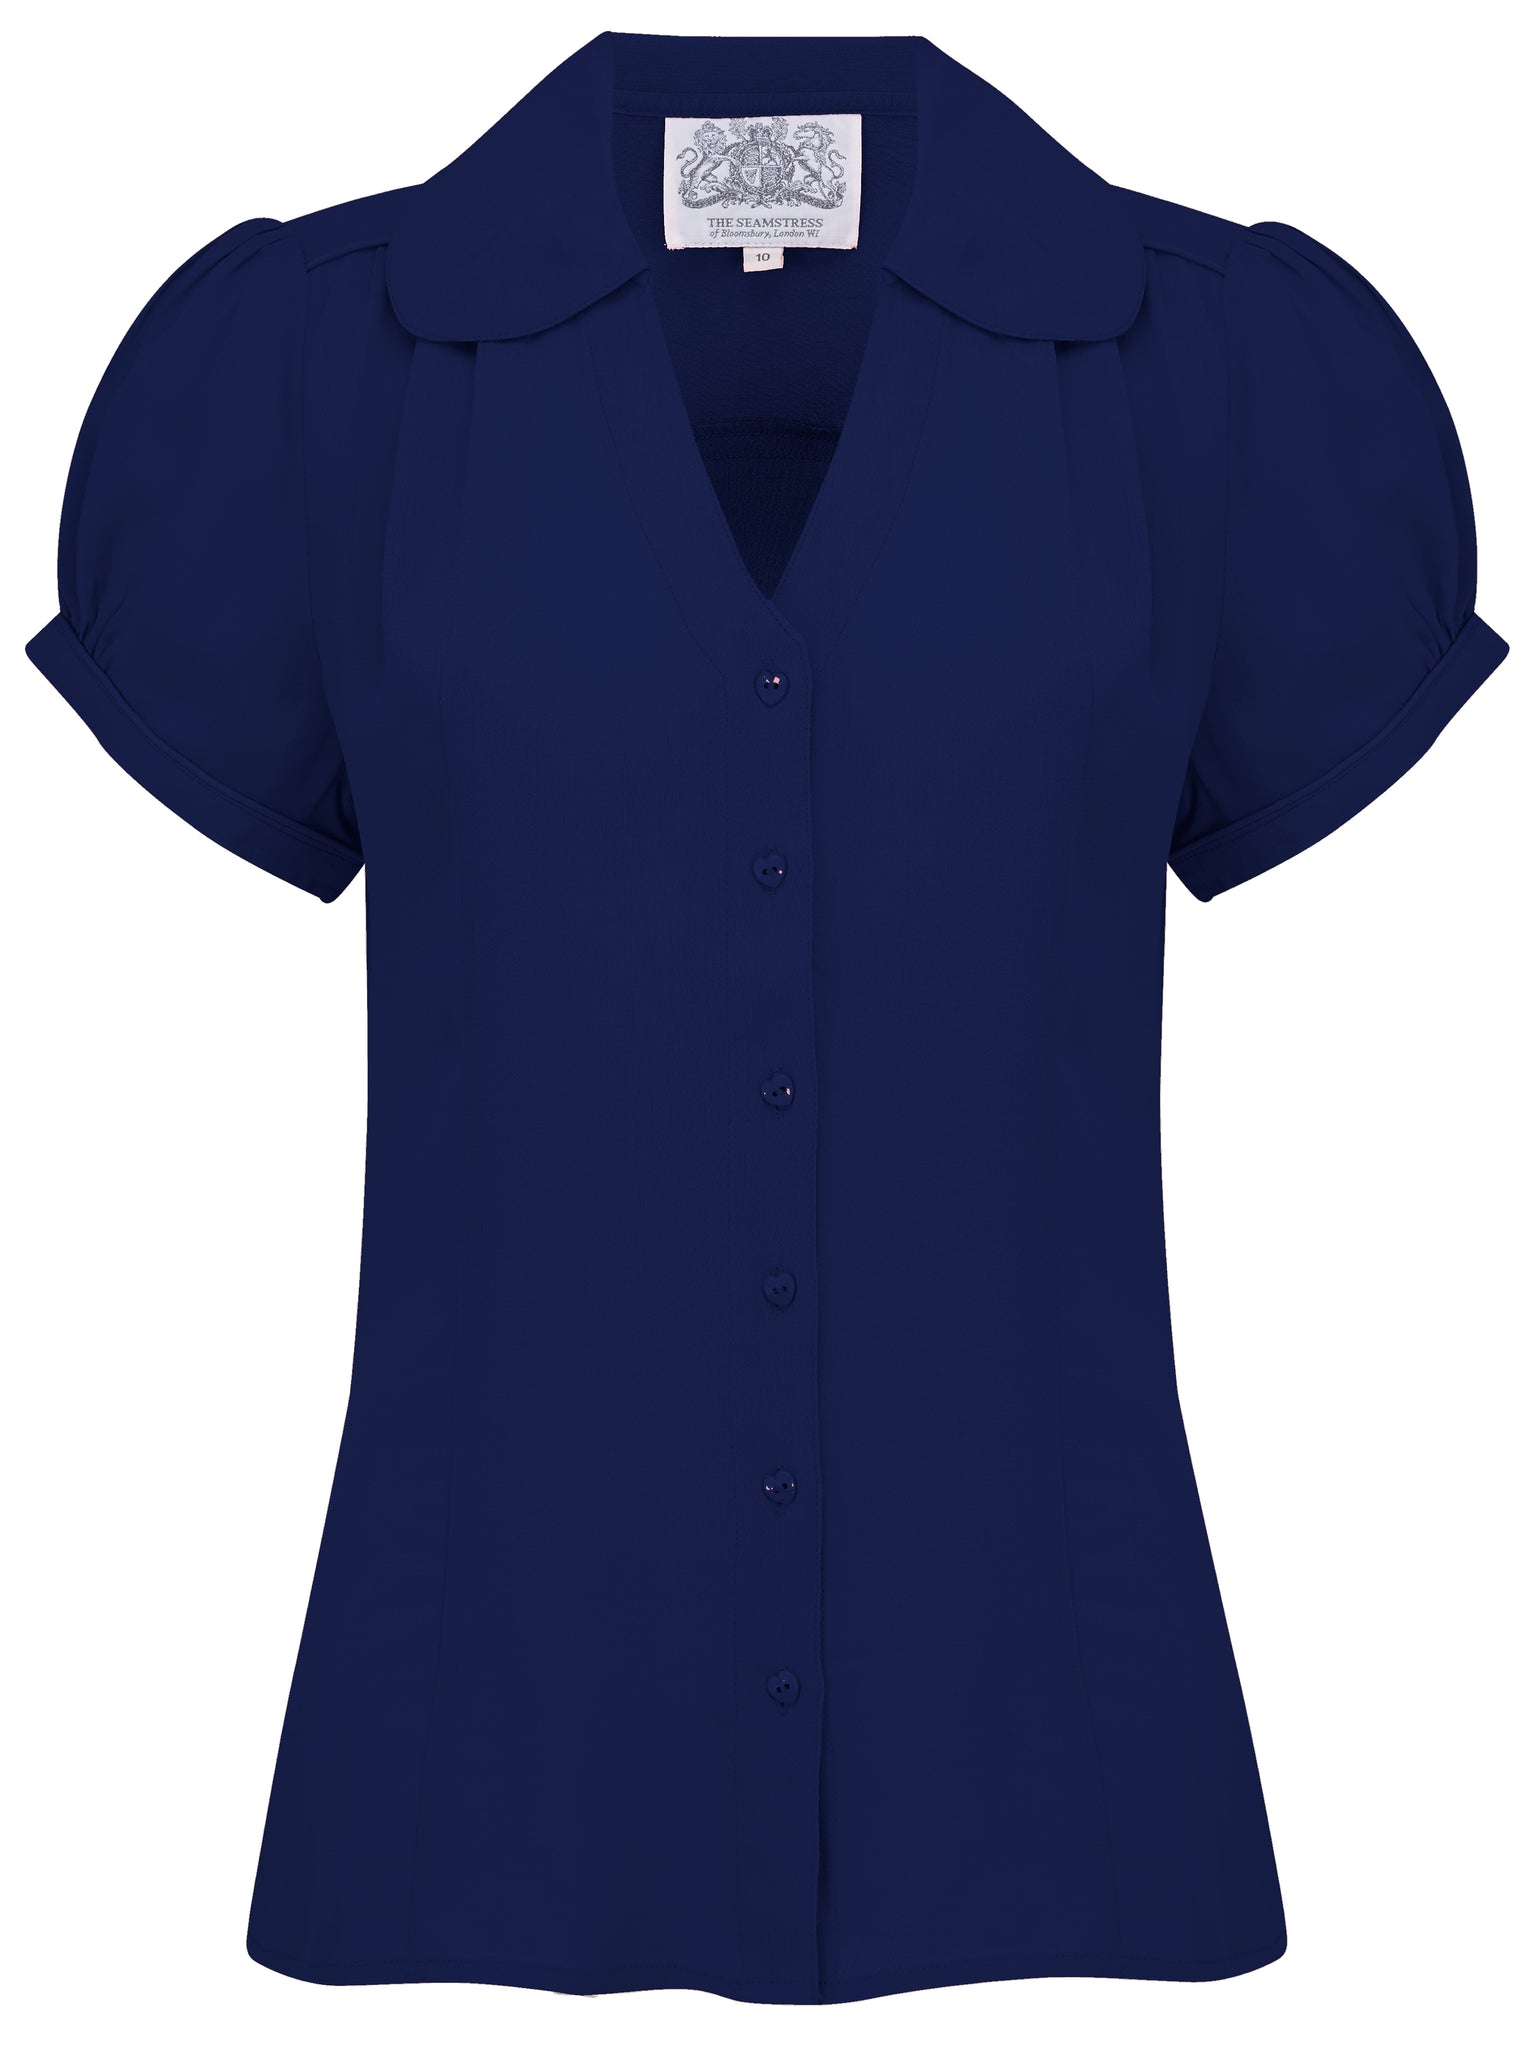 "Judy" Blouse in Navy, Classic 1940s Vintage Style - True and authentic vintage style clothing, inspired by the Classic styles of CC41 , WW2 and the fun 1950s RocknRoll era, for everyday wear plus events like Goodwood Revival, Twinwood Festival and Viva Las Vegas Rockabilly Weekend Rock n Romance The Seamstress Of Bloomsbury